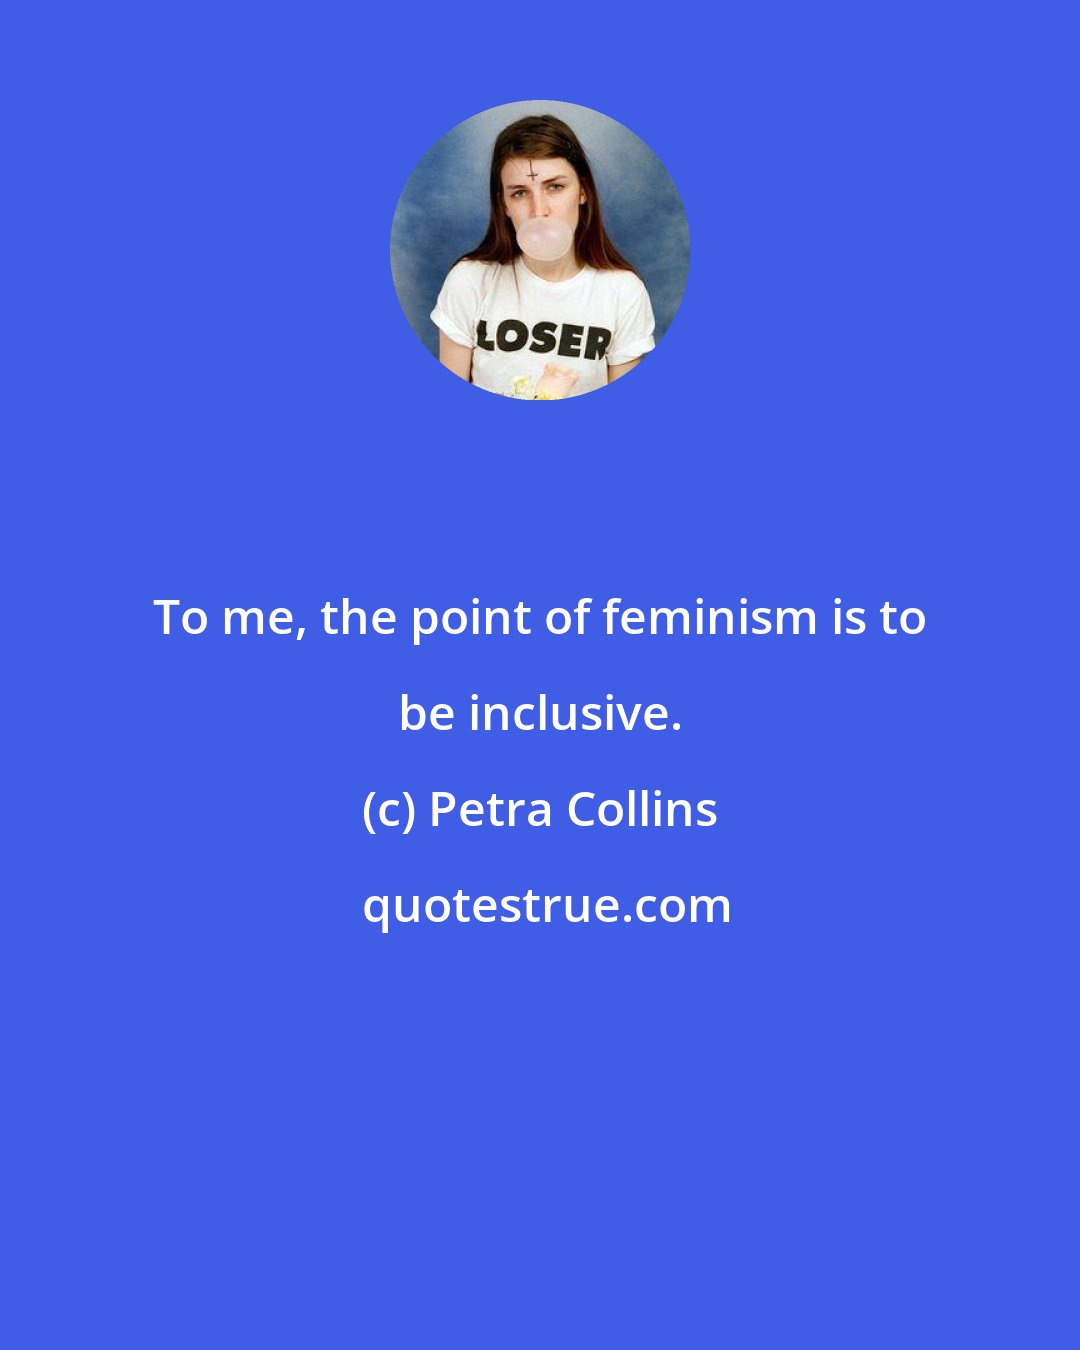 Petra Collins: To me, the point of feminism is to be inclusive.